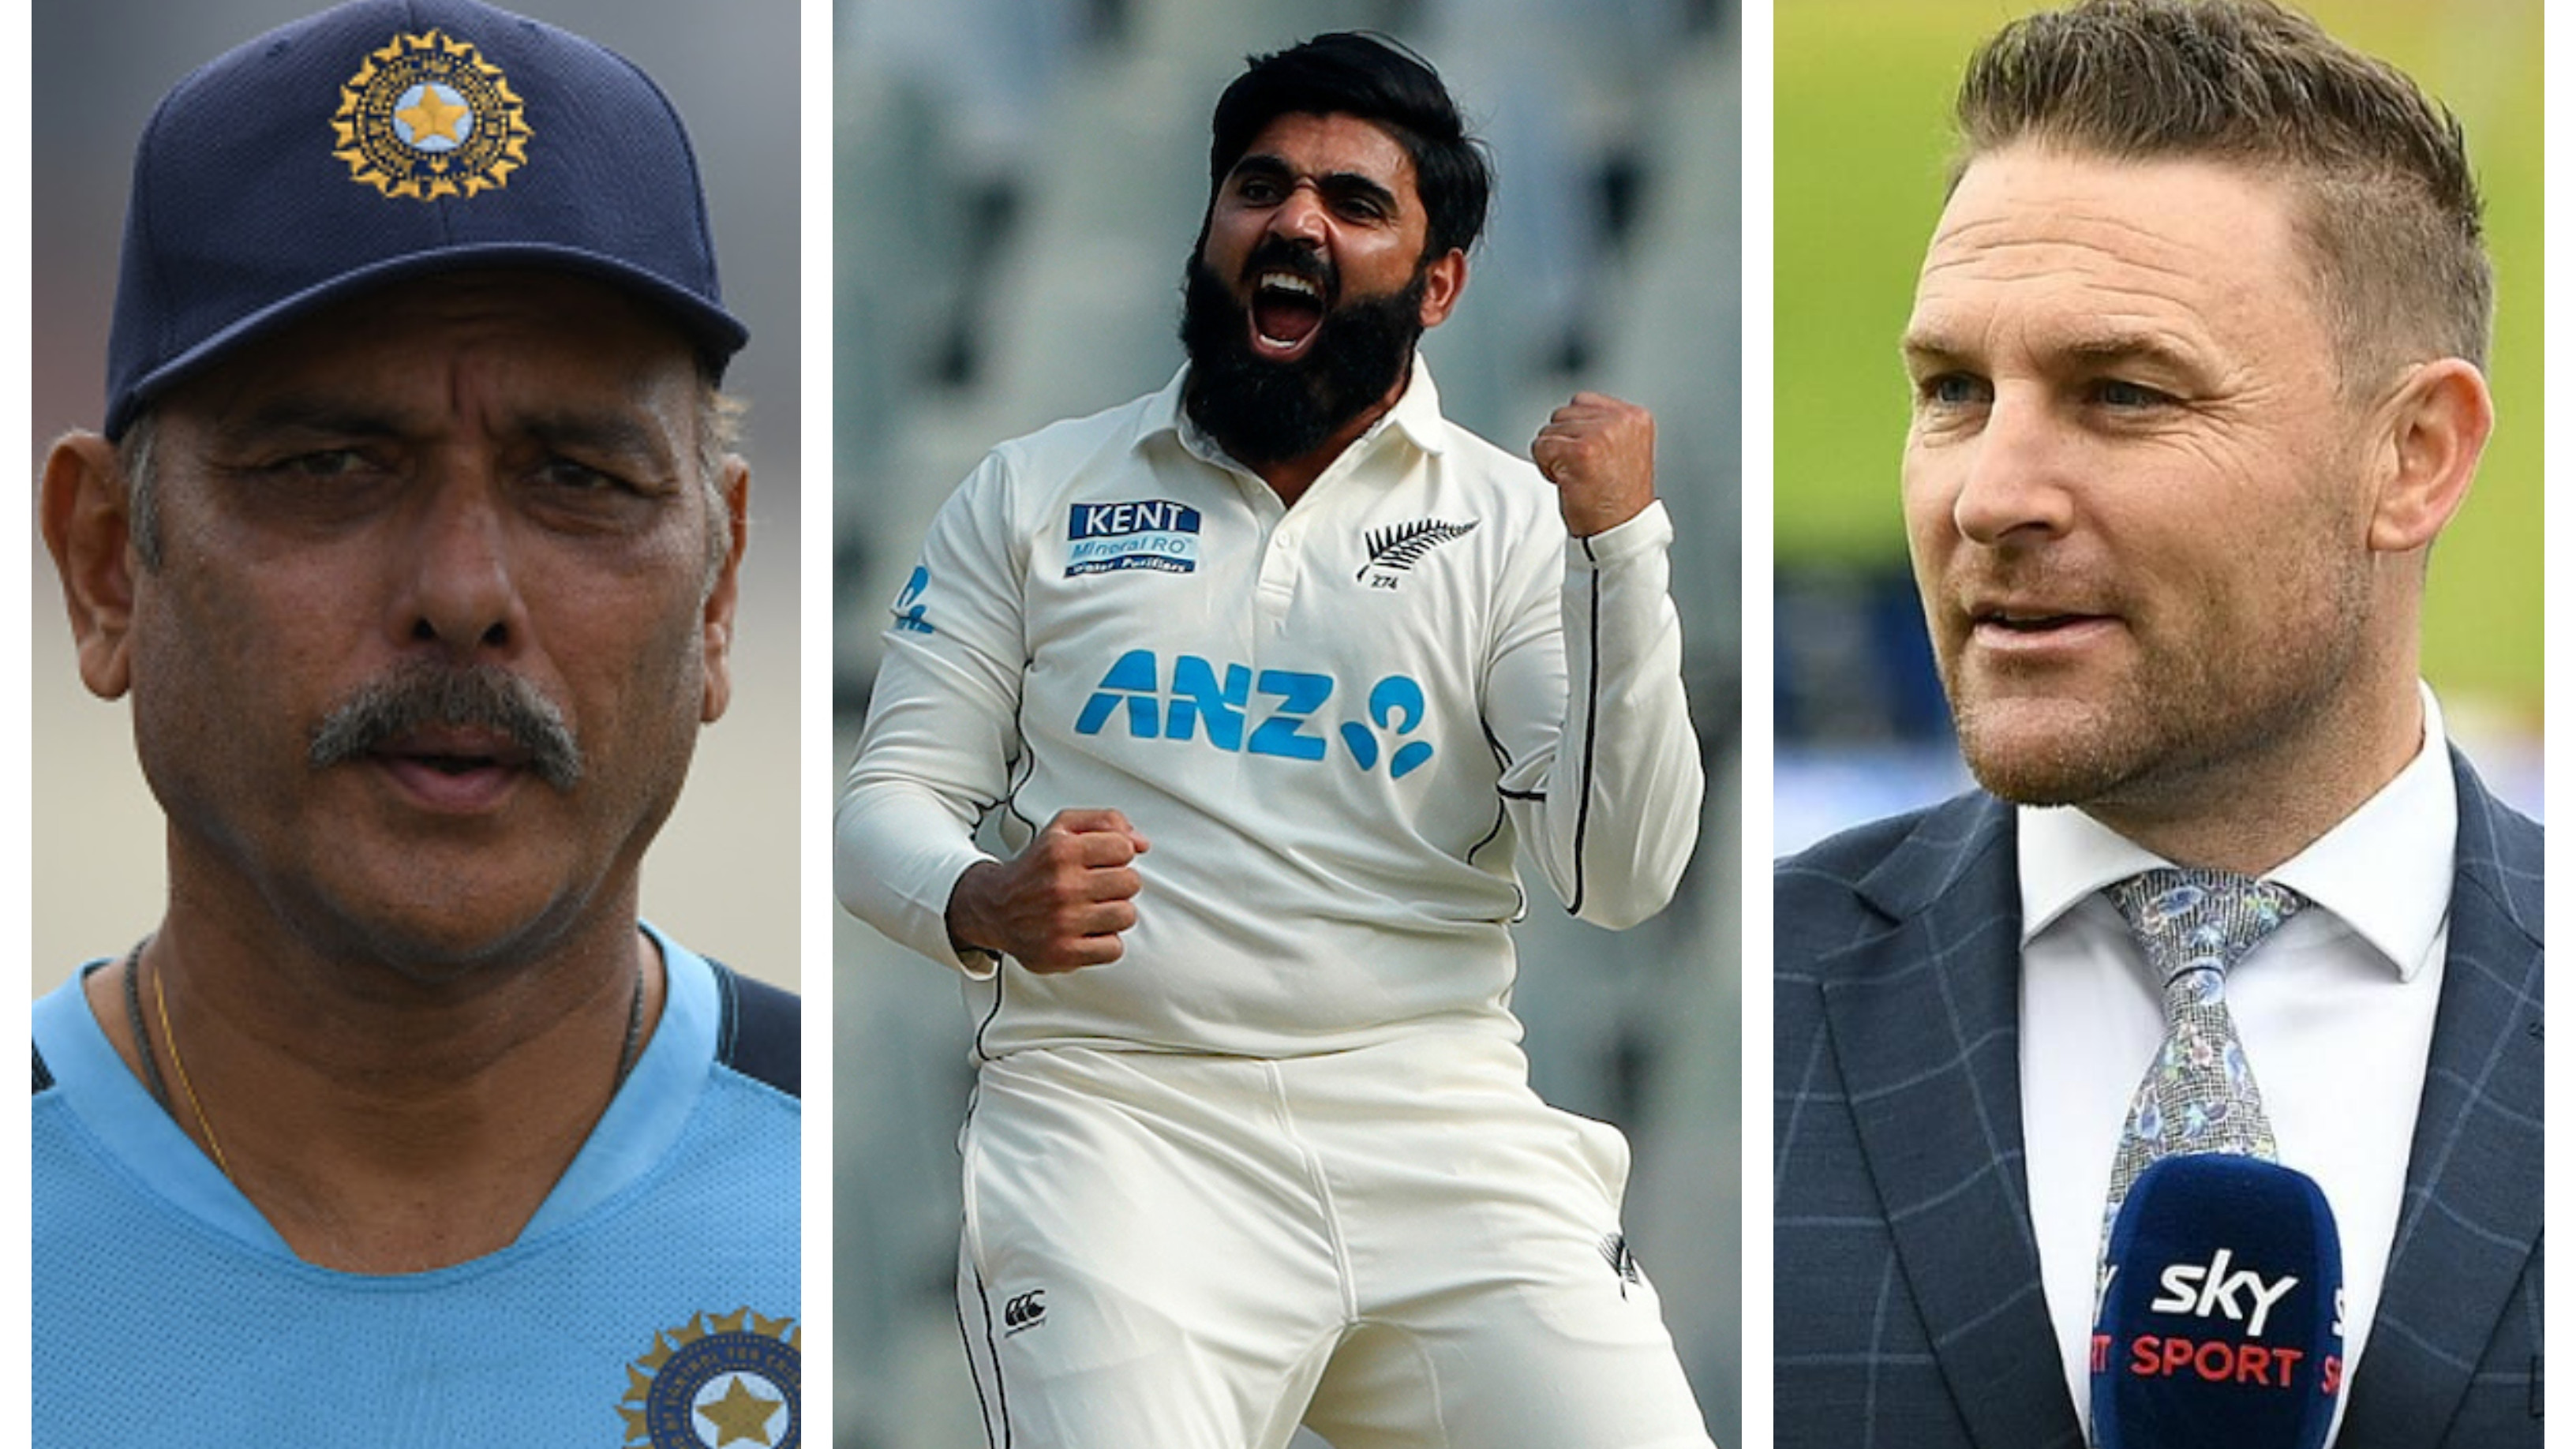 IND v NZ 2021: Cricket fraternity reacts in awe as Ajaz Patel picks all 10 wickets in India’s first innings